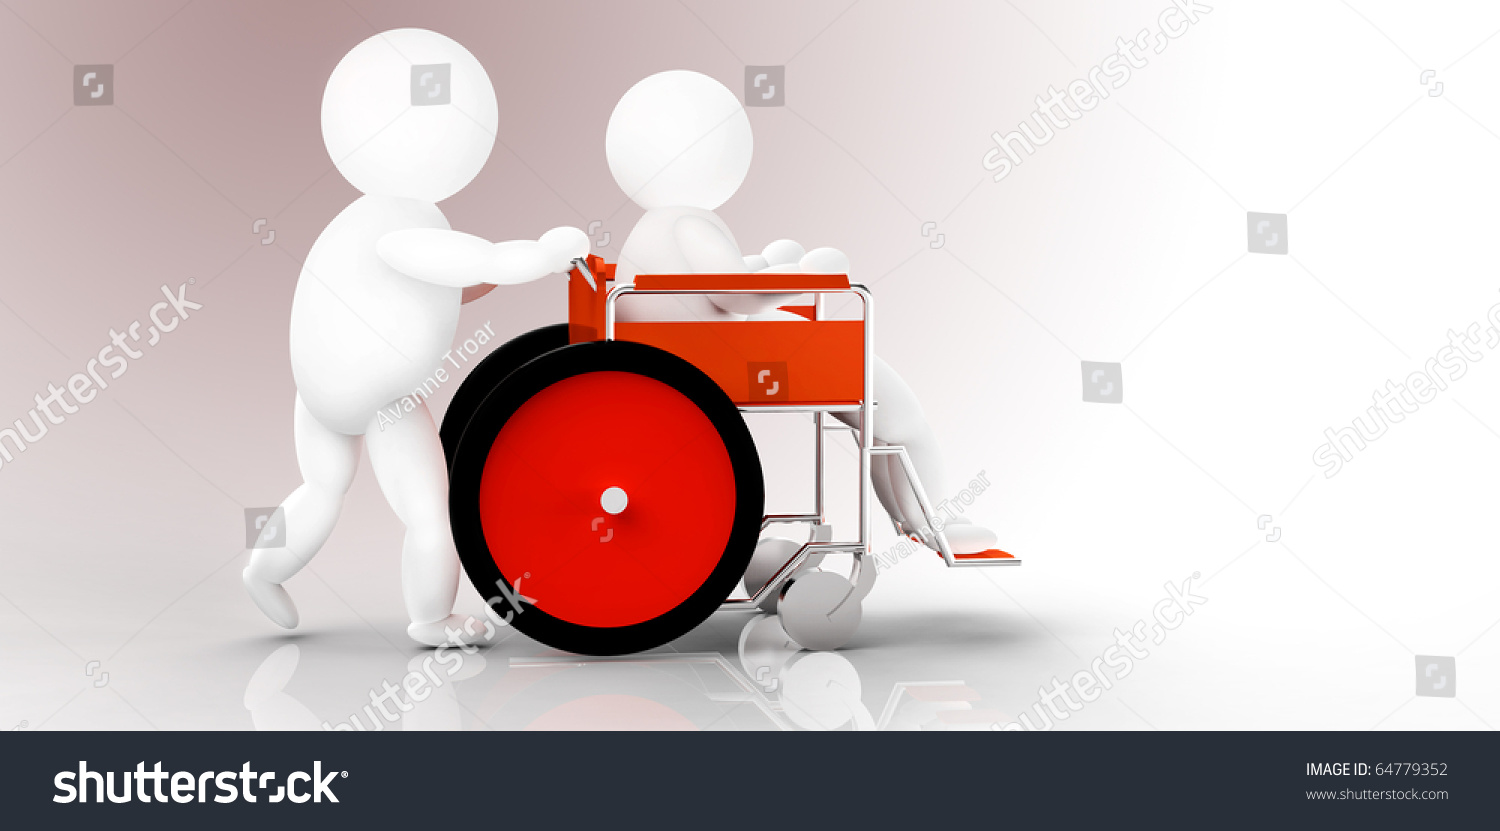 Two People, Wheelchair Stock Photo 64779352 : Shutterstock